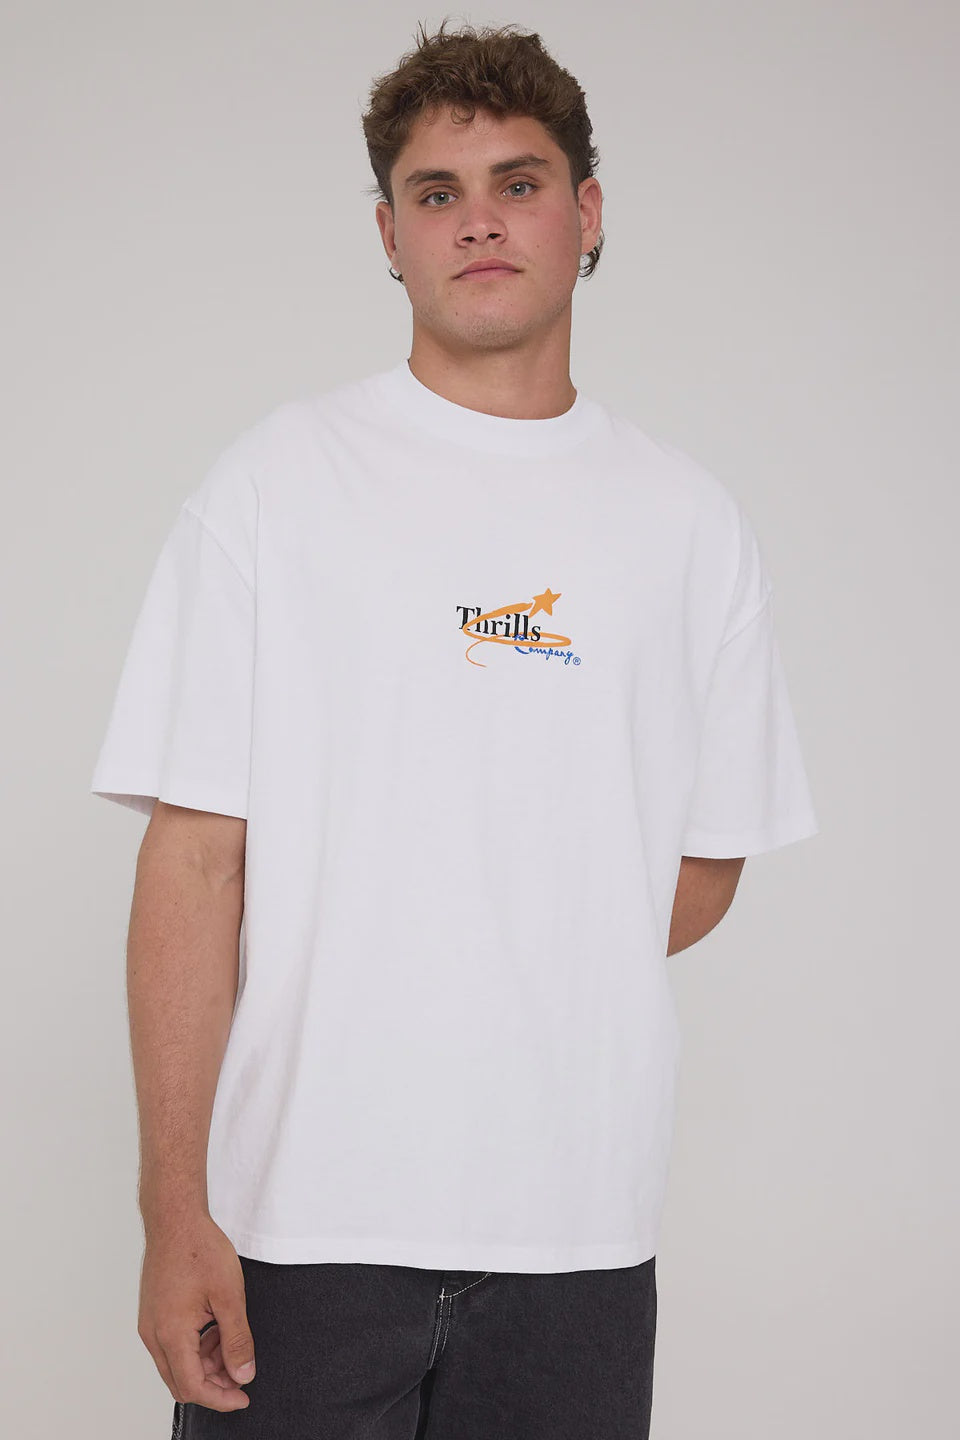 Thrills Earthdrone Box Fit Oversize Tee ~ White